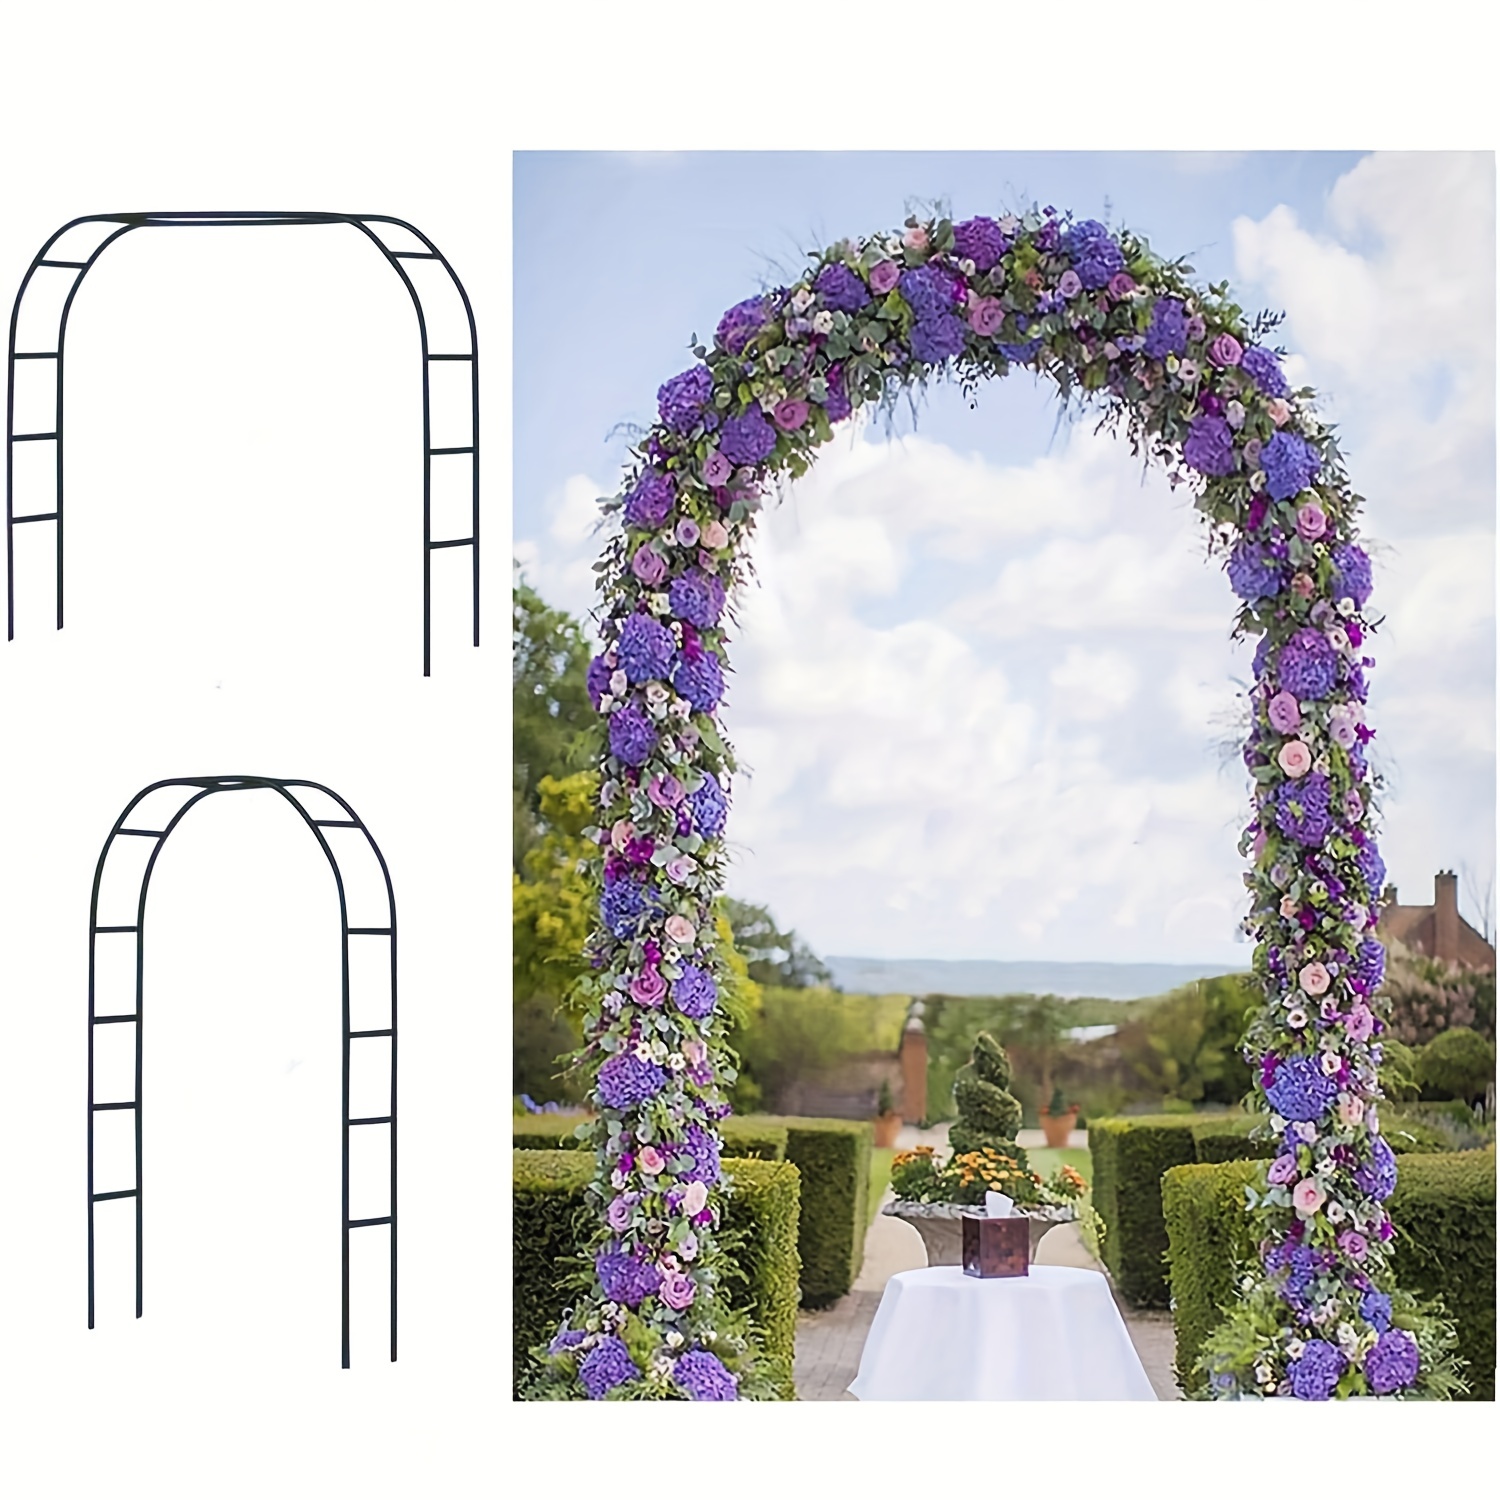 

1pc. Black Metal Balloon Arch Garden Arch Suitable For Flower Balloons Climbing Vines And Plants And Wedding Birthday Adult Party Background Decoration